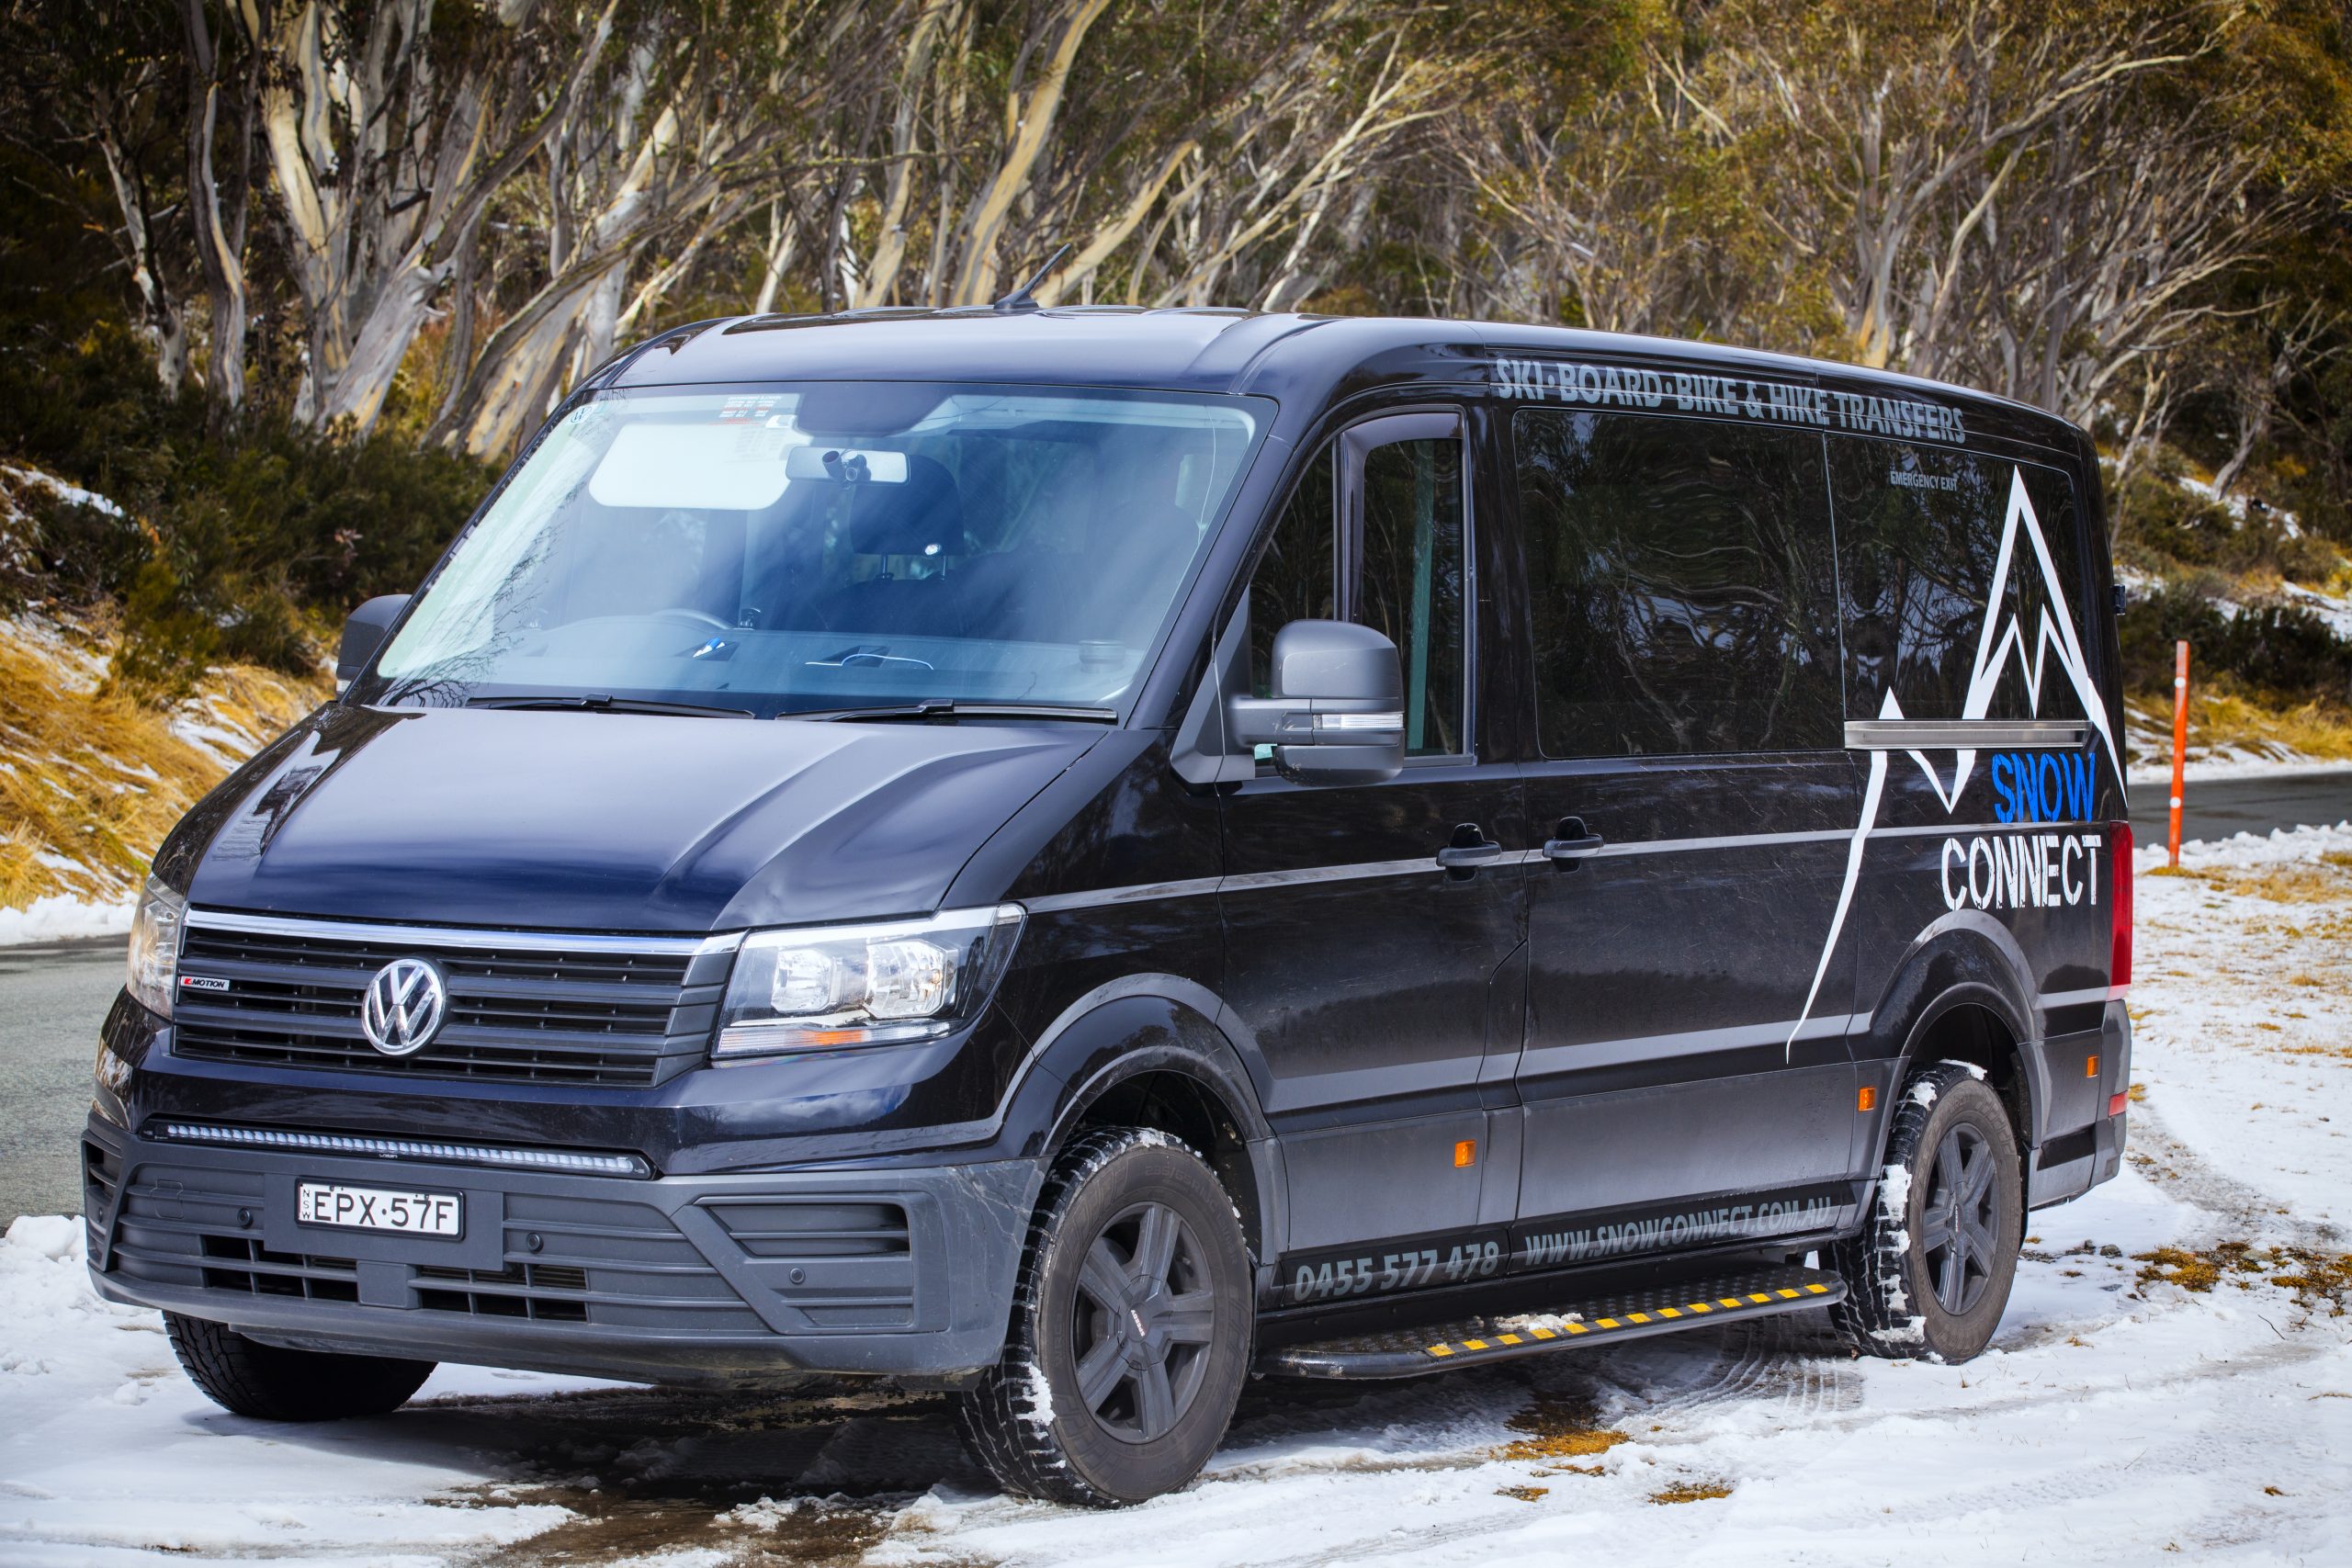 snow connect private transfer from cooma to jindabyne